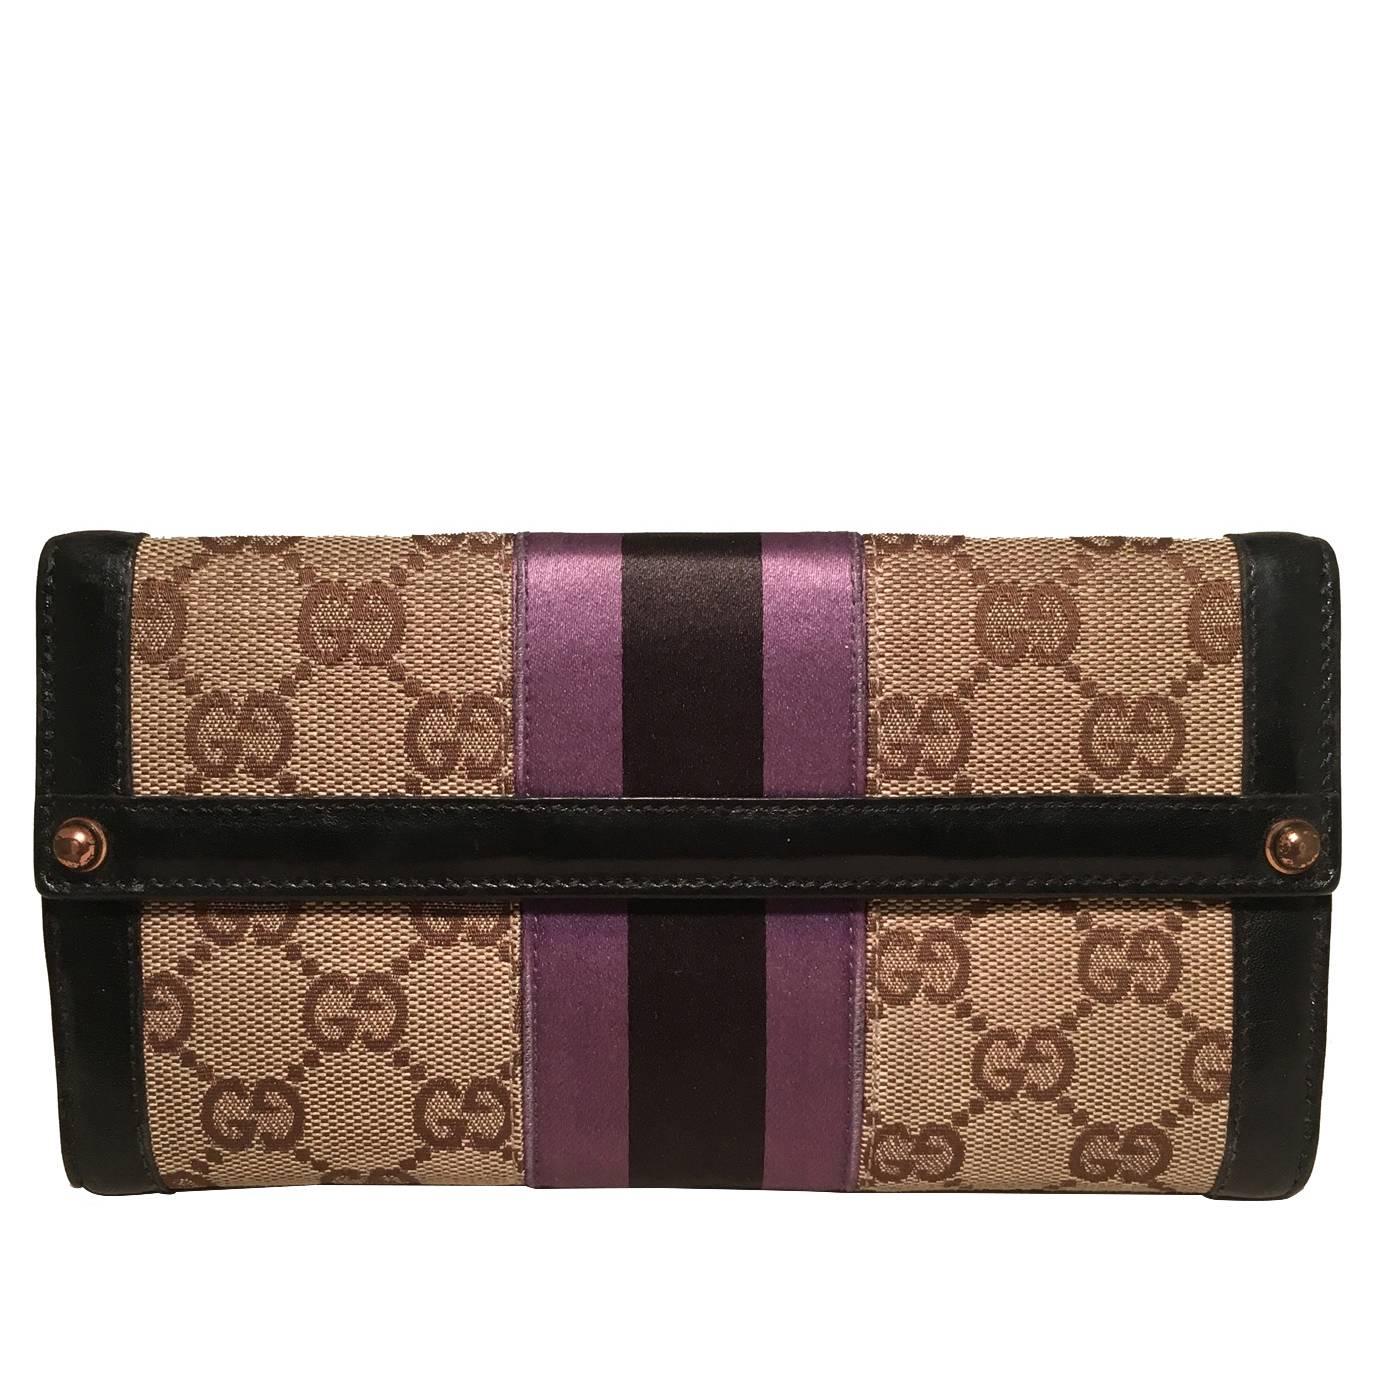 Gucci Monogram Black and Purple Leather and Satin Wallet 